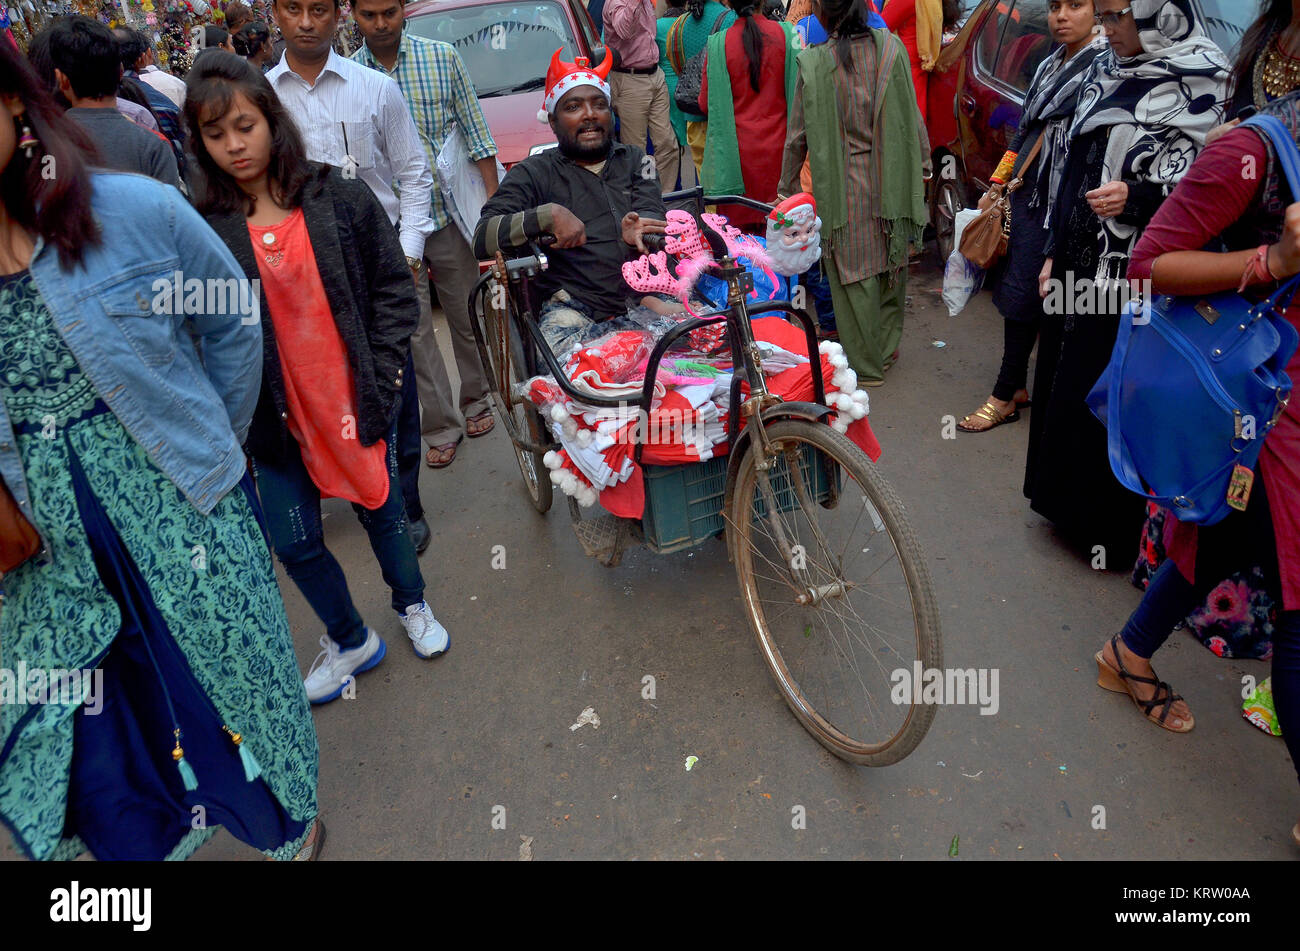 Kolkata, India. 20th Dec, 2017. A physical challenge person sells Santa Claus hats for customers at Christmas time on December 20, 2017 in New market, Kolkata, India. Credit: Sanjay Purkait/Pacific Press/Alamy Live News Stock Photo